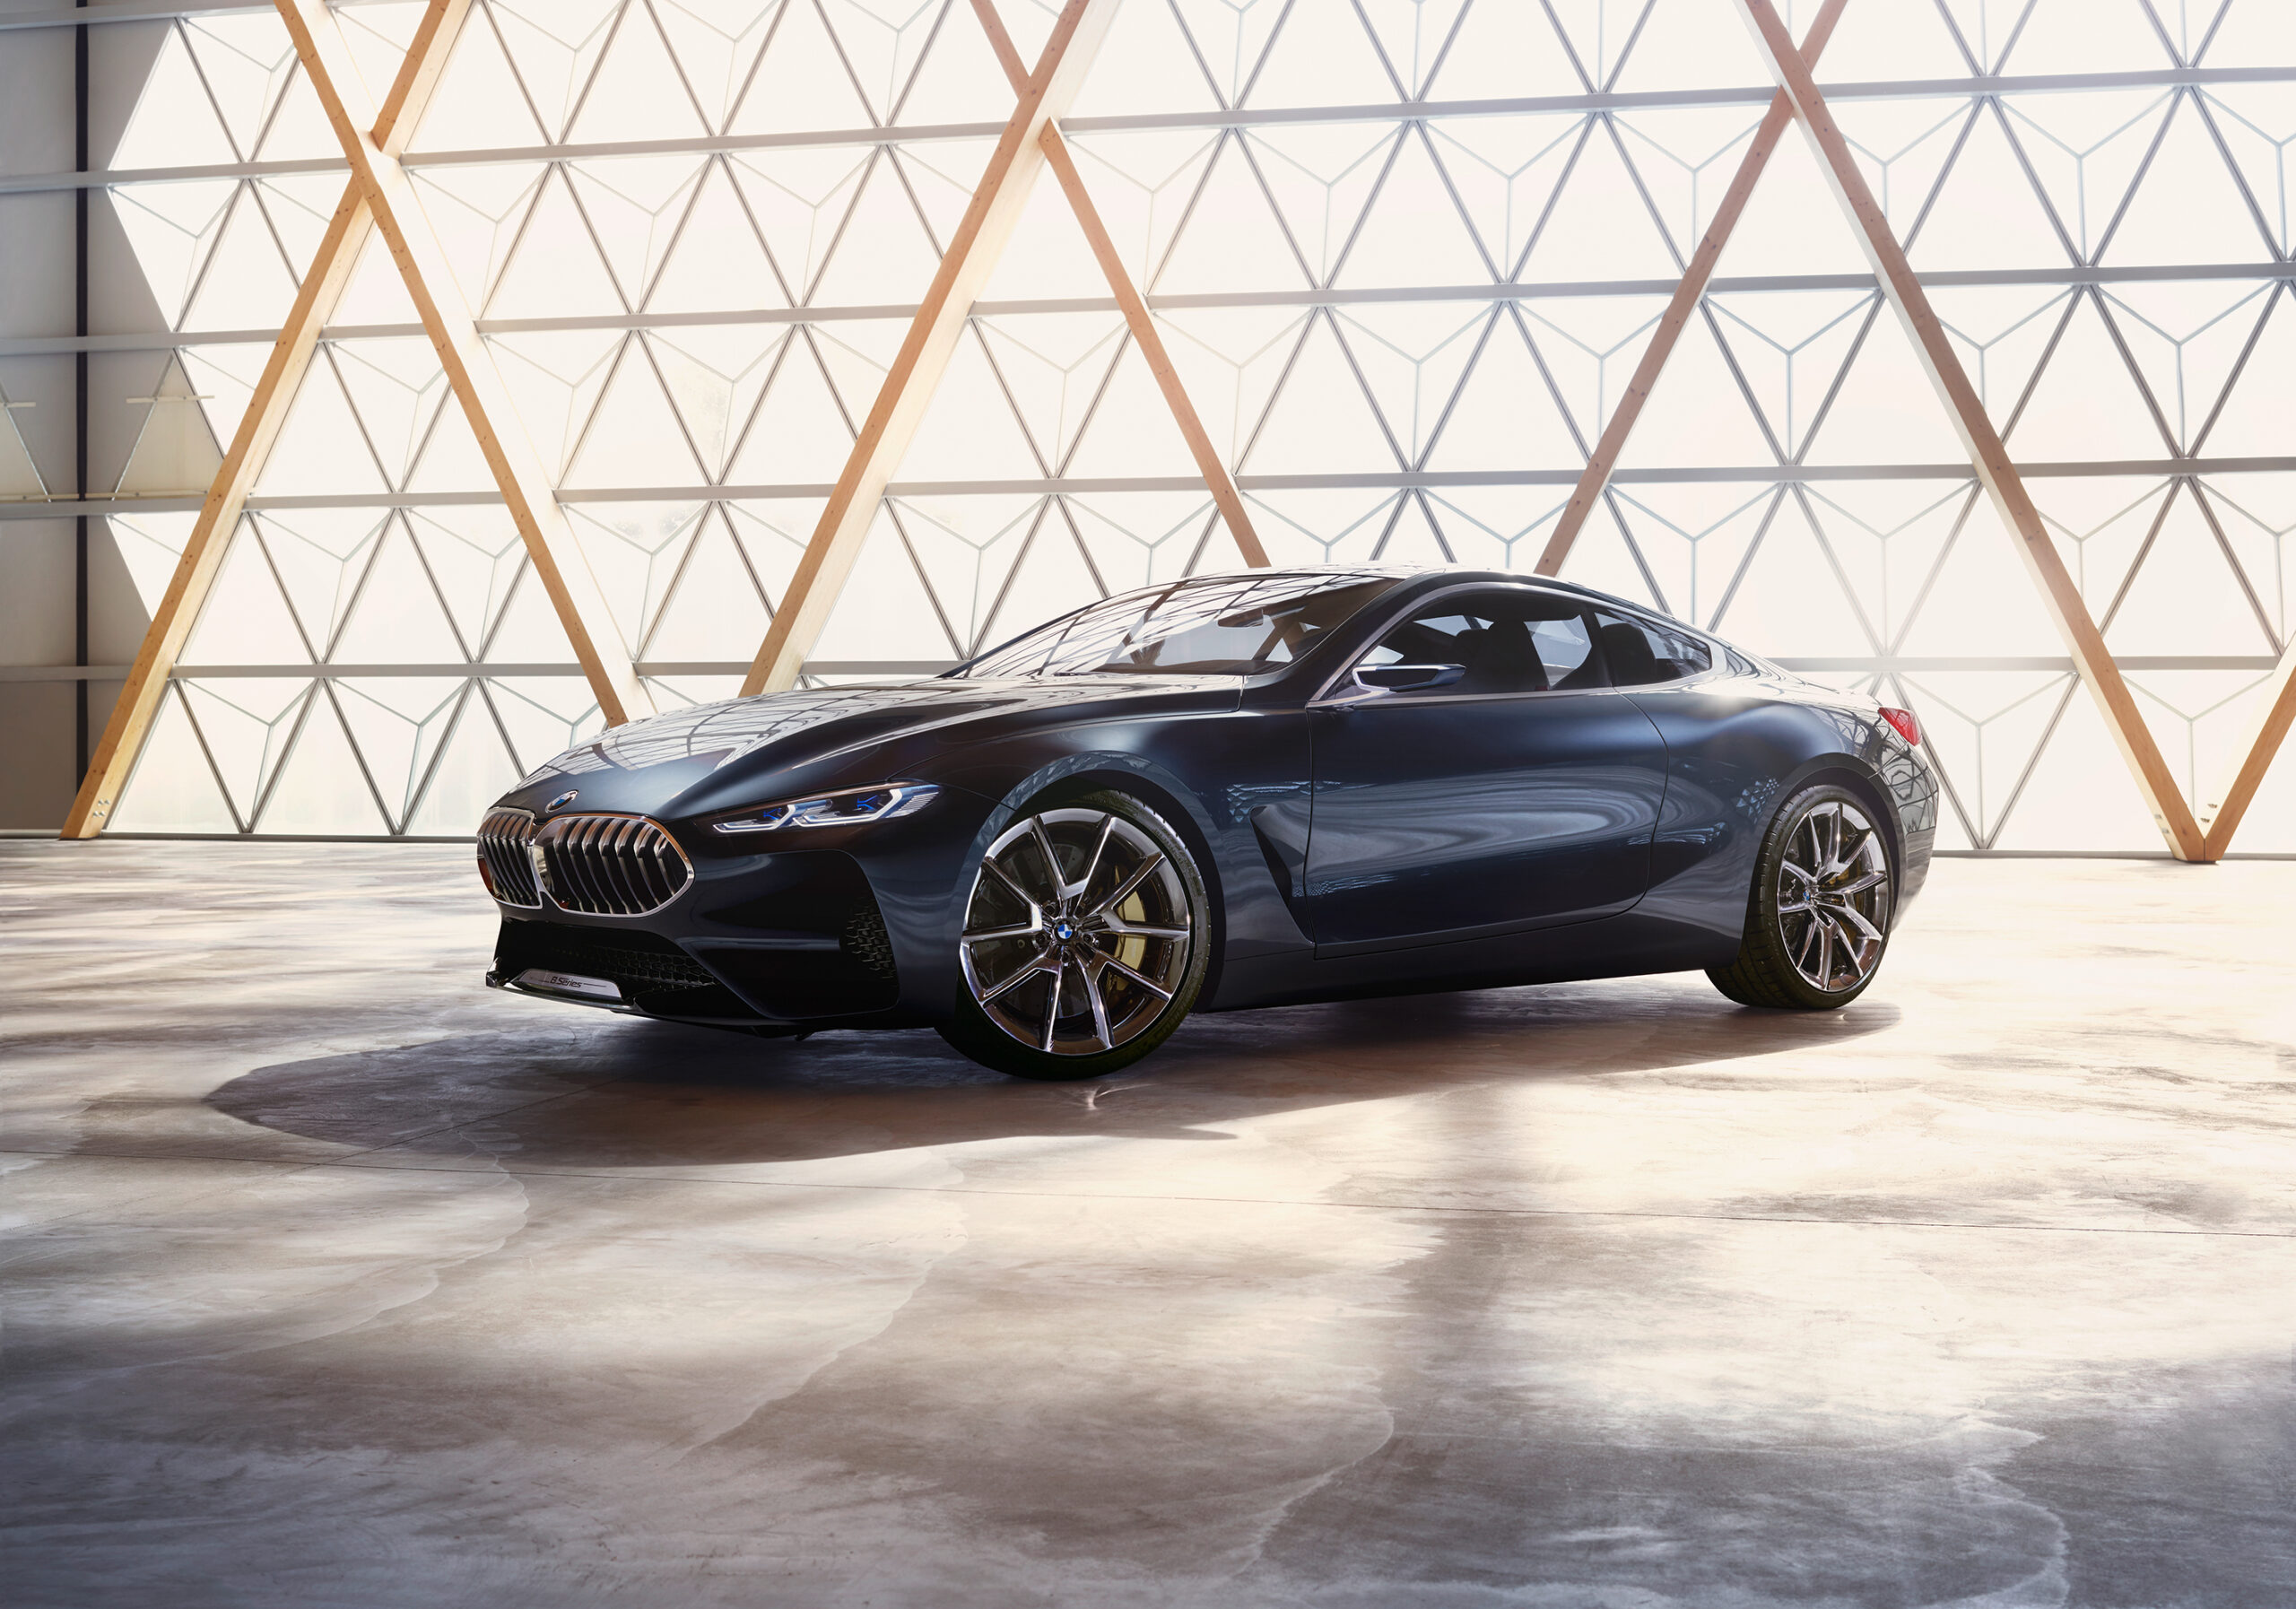 New Car Friday: BMW and Jaguar give us something special